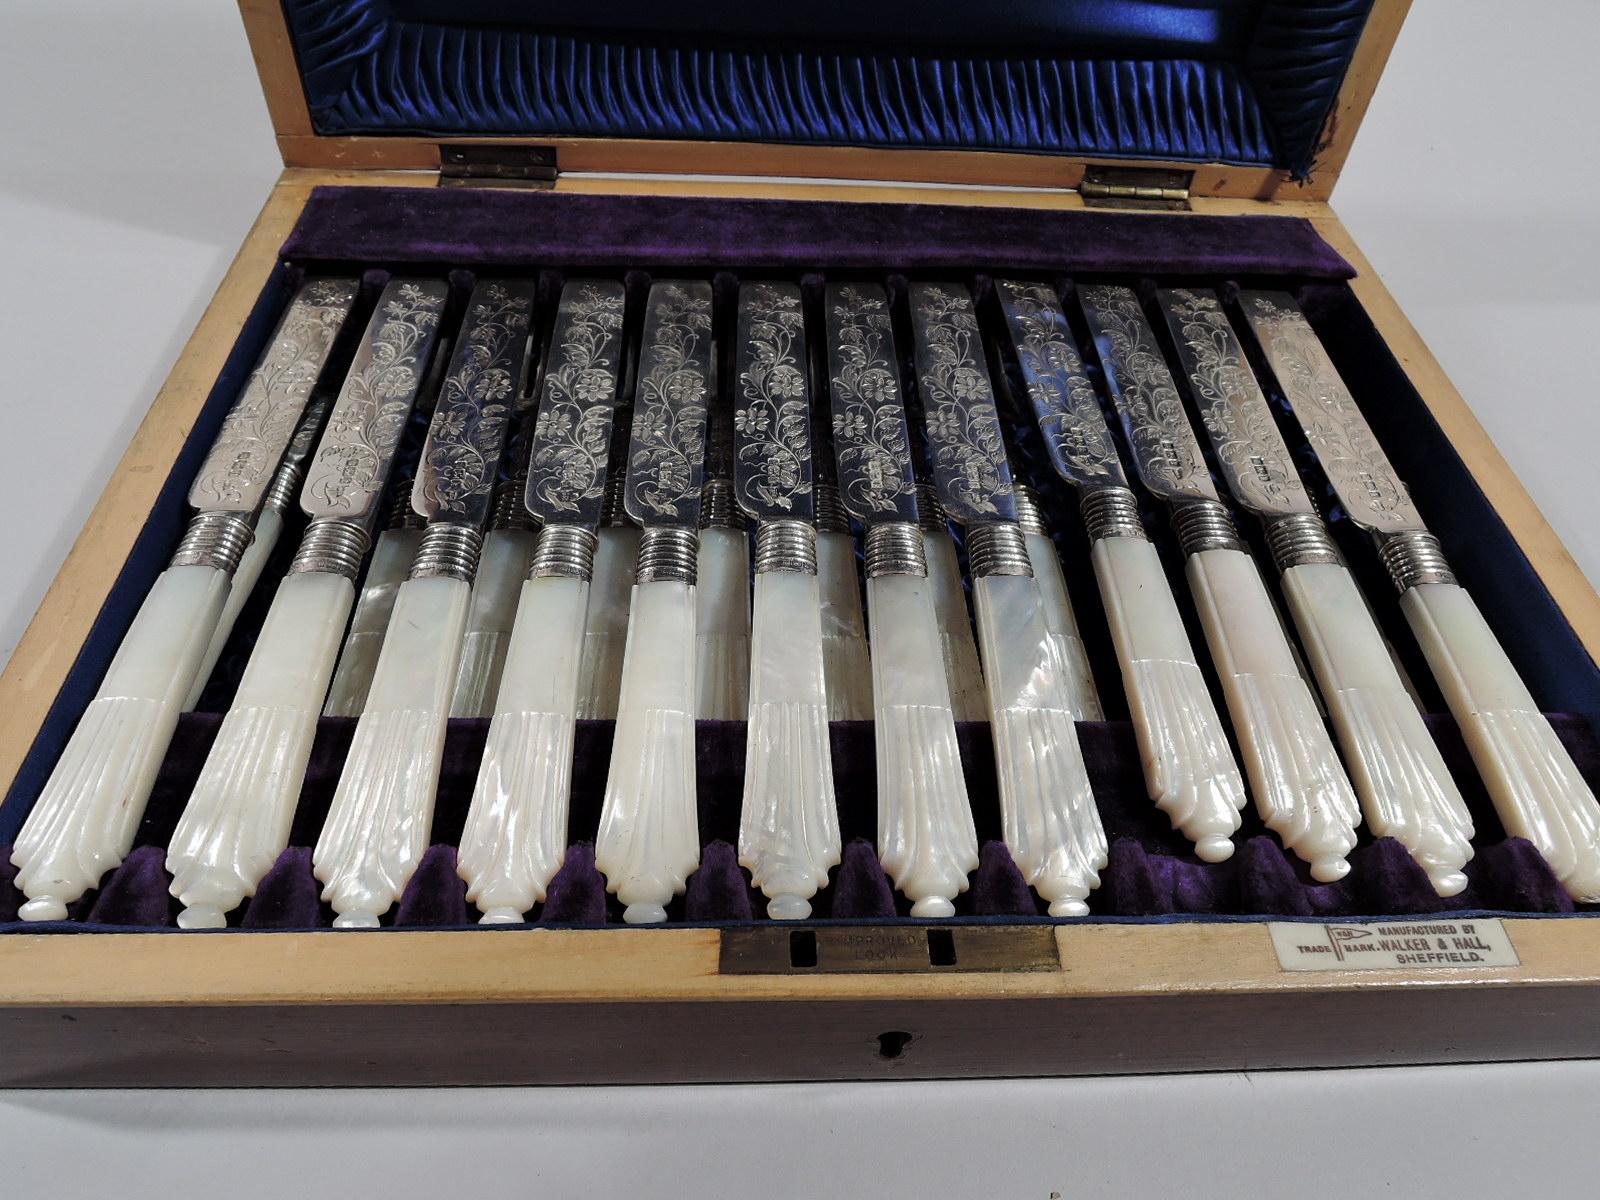 Edwardian sterling silver and mother of pearl fruit set. Made by Walker & Hall in Sheffield in 1902. This set comprises 12 knives and 12 forks.

Sterling silver blades and shanks engraved with flowers. Handles are mother of pearl with carved